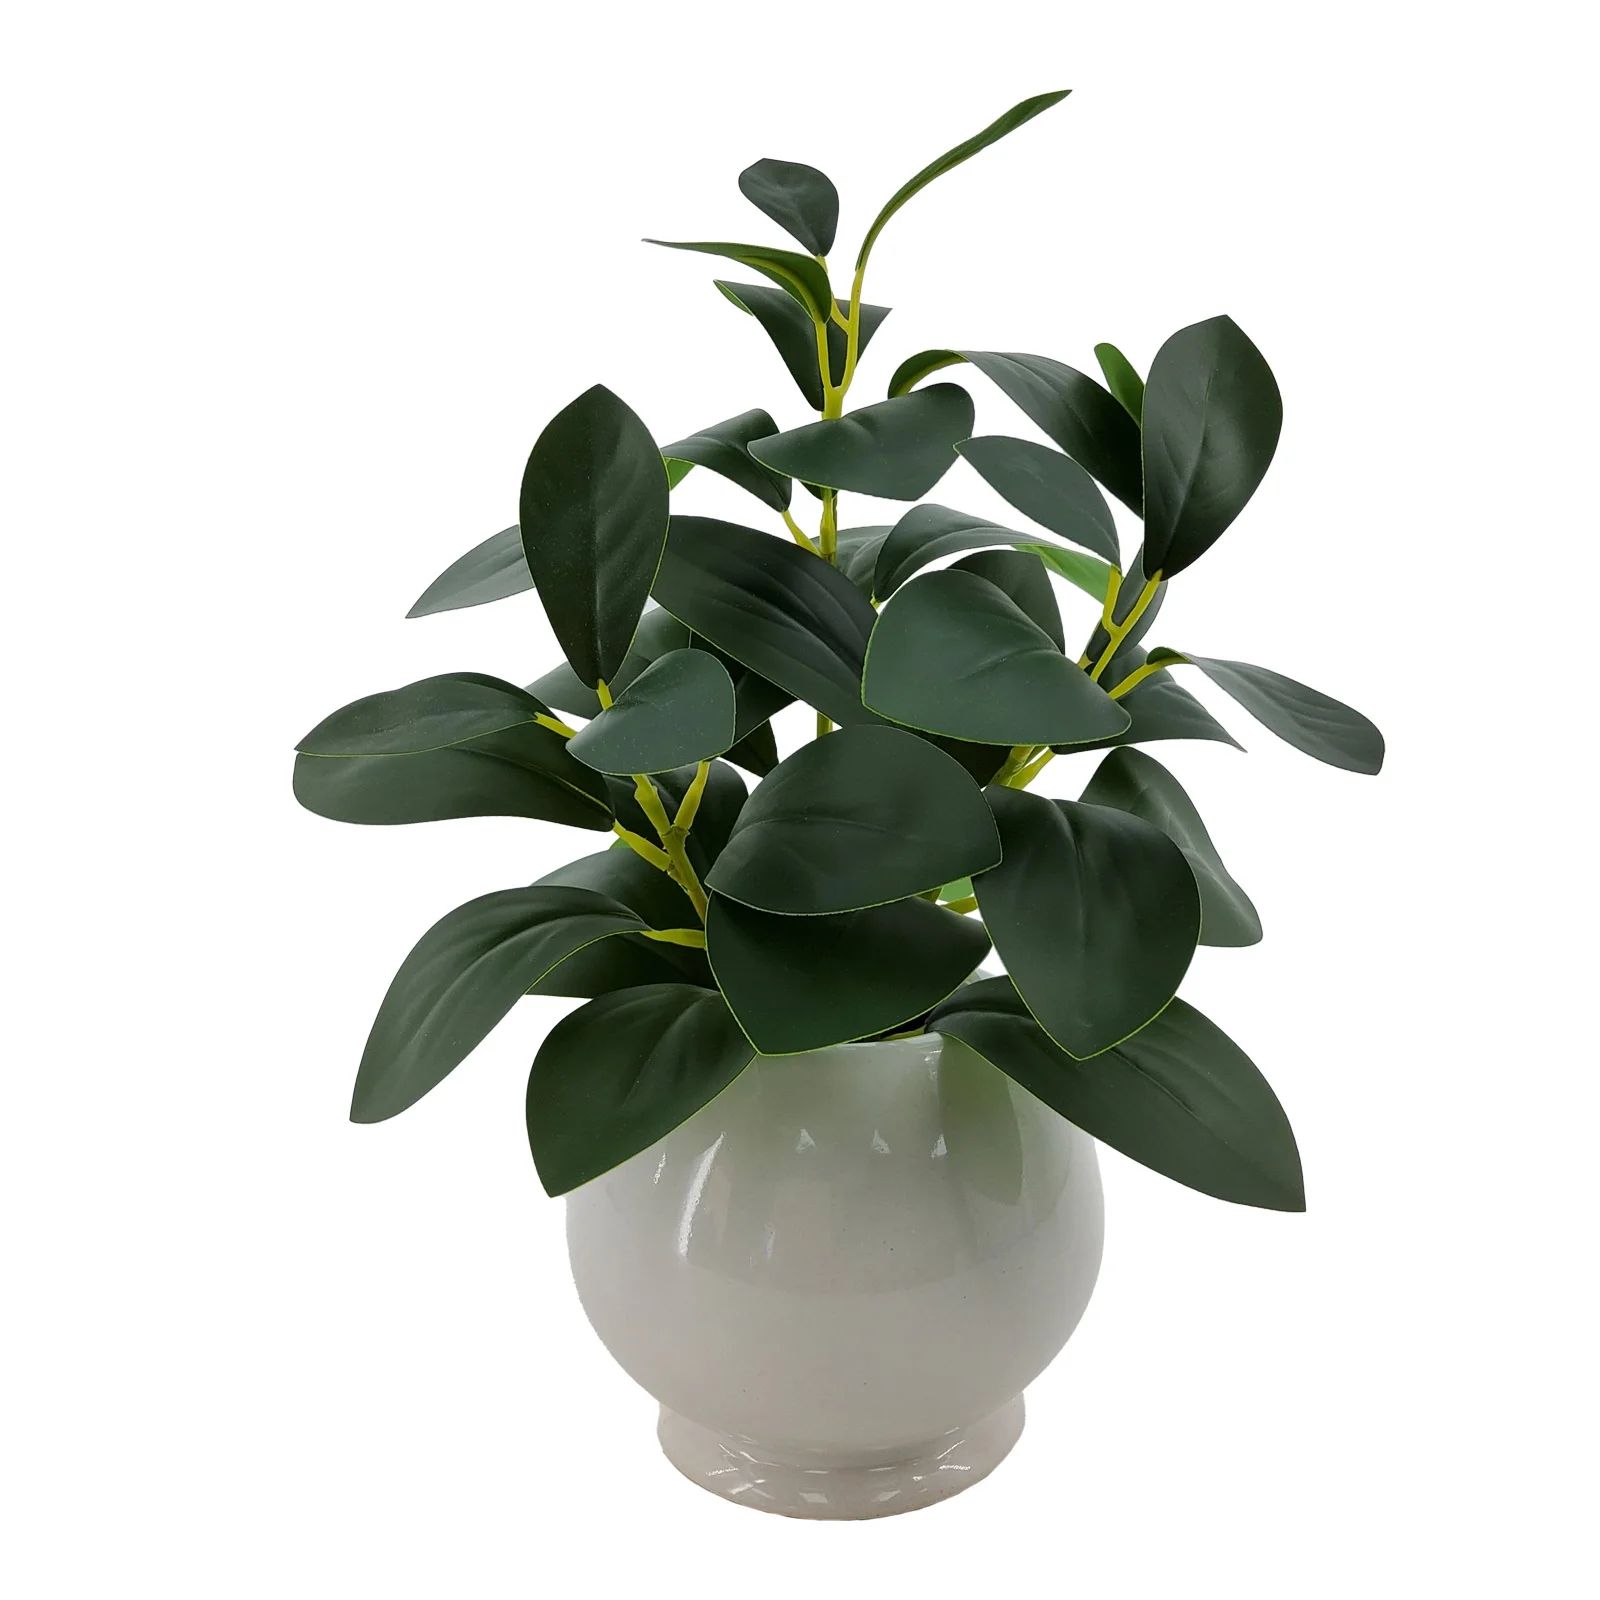 Mainstays 11in Indoor Artificial Peperomia Plant in White Color Ceramic Pot. Weight 1.2lb | Walmart (US)